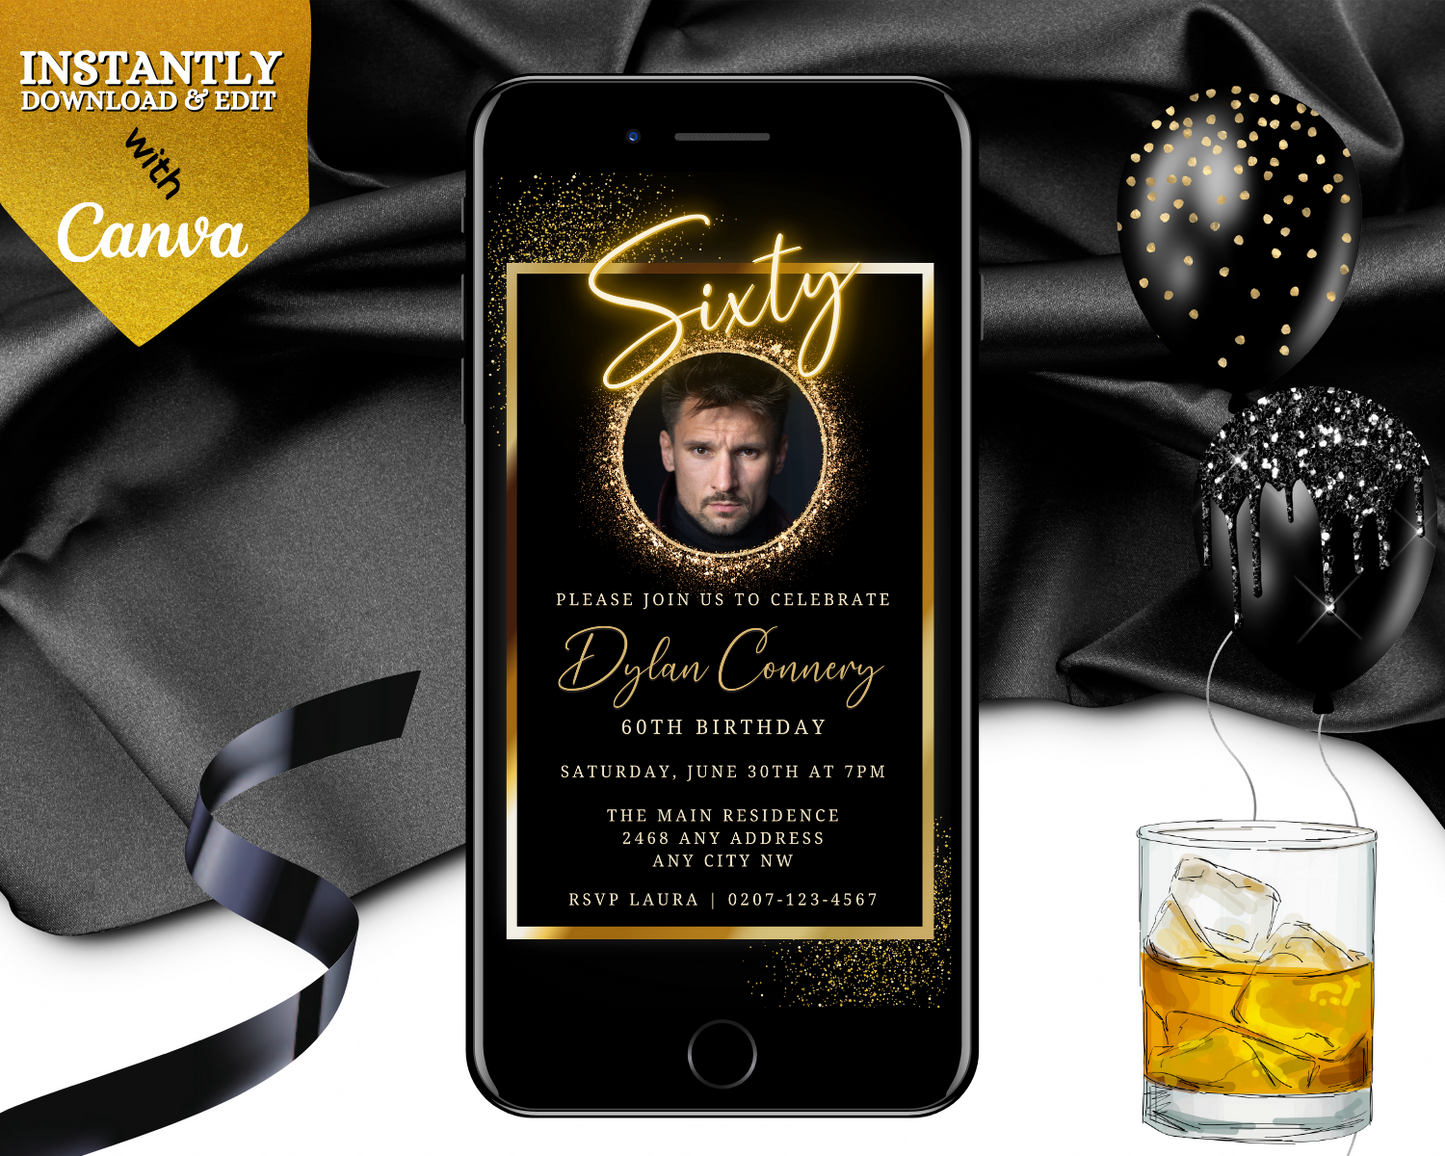 Customizable Digital Neon Gold Oval Photo Frame for 60th Birthday Evite displayed on smartphone with a man's photo; includes whiskey glass, invitation, and decorative balloon.